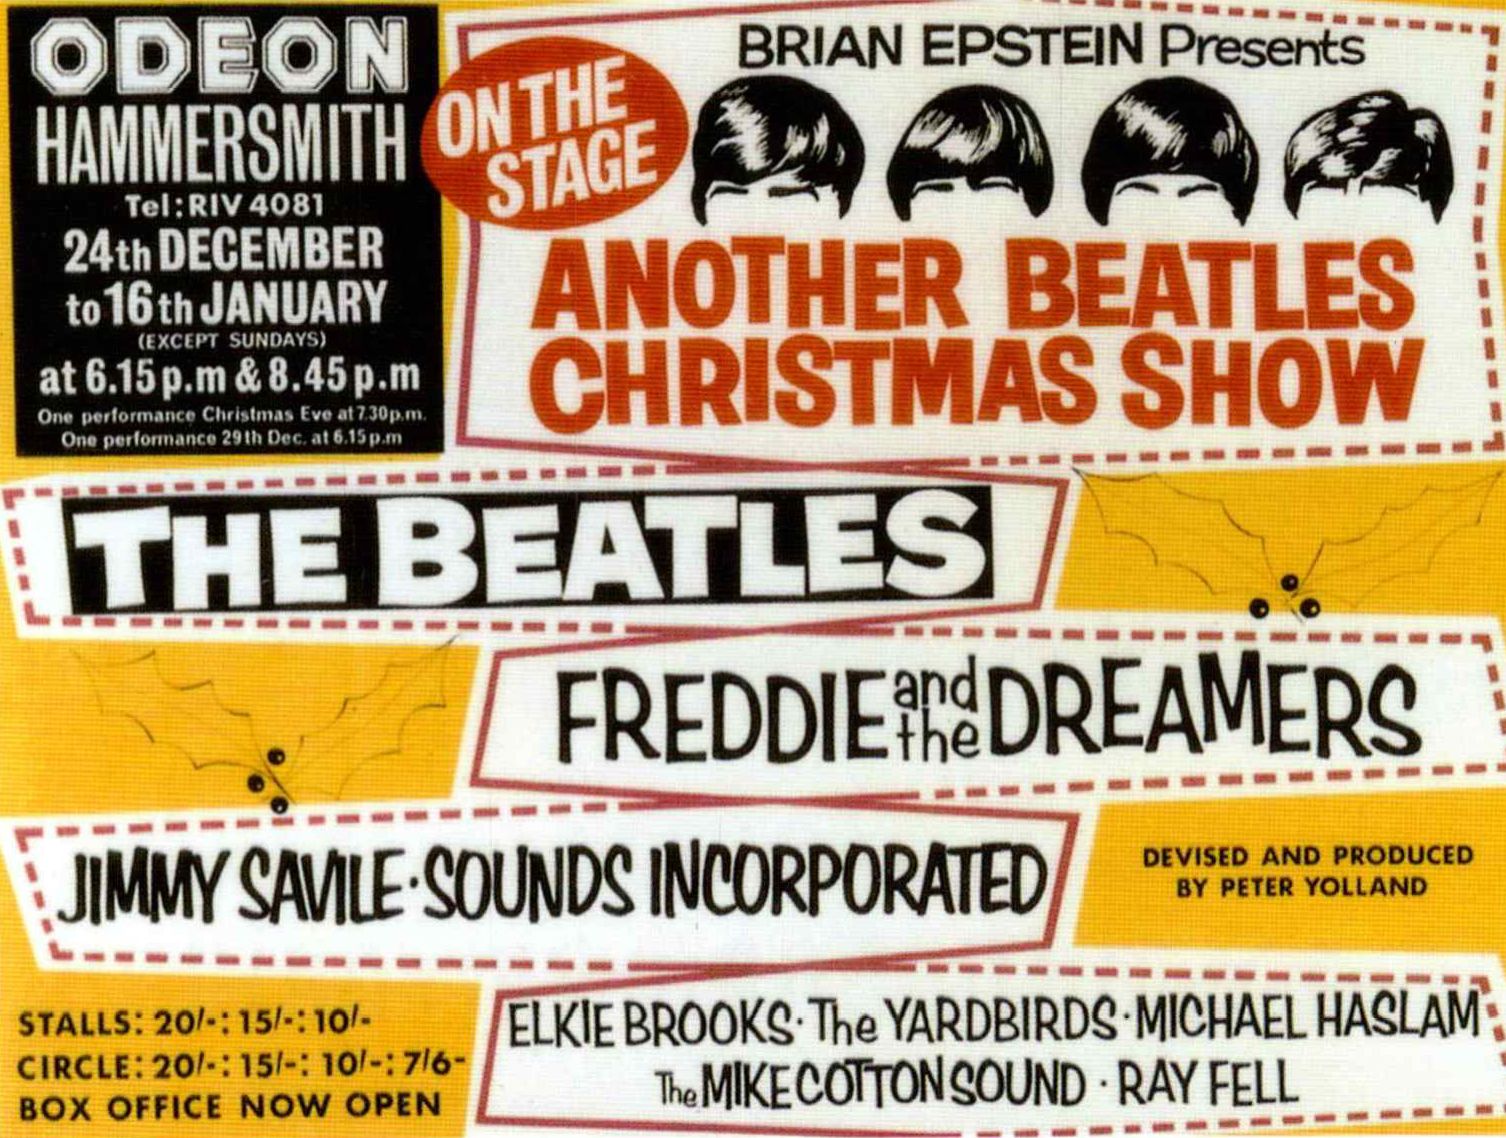 AOR-1.114 Another Beatles Christmas Show 1963 Concert Poster